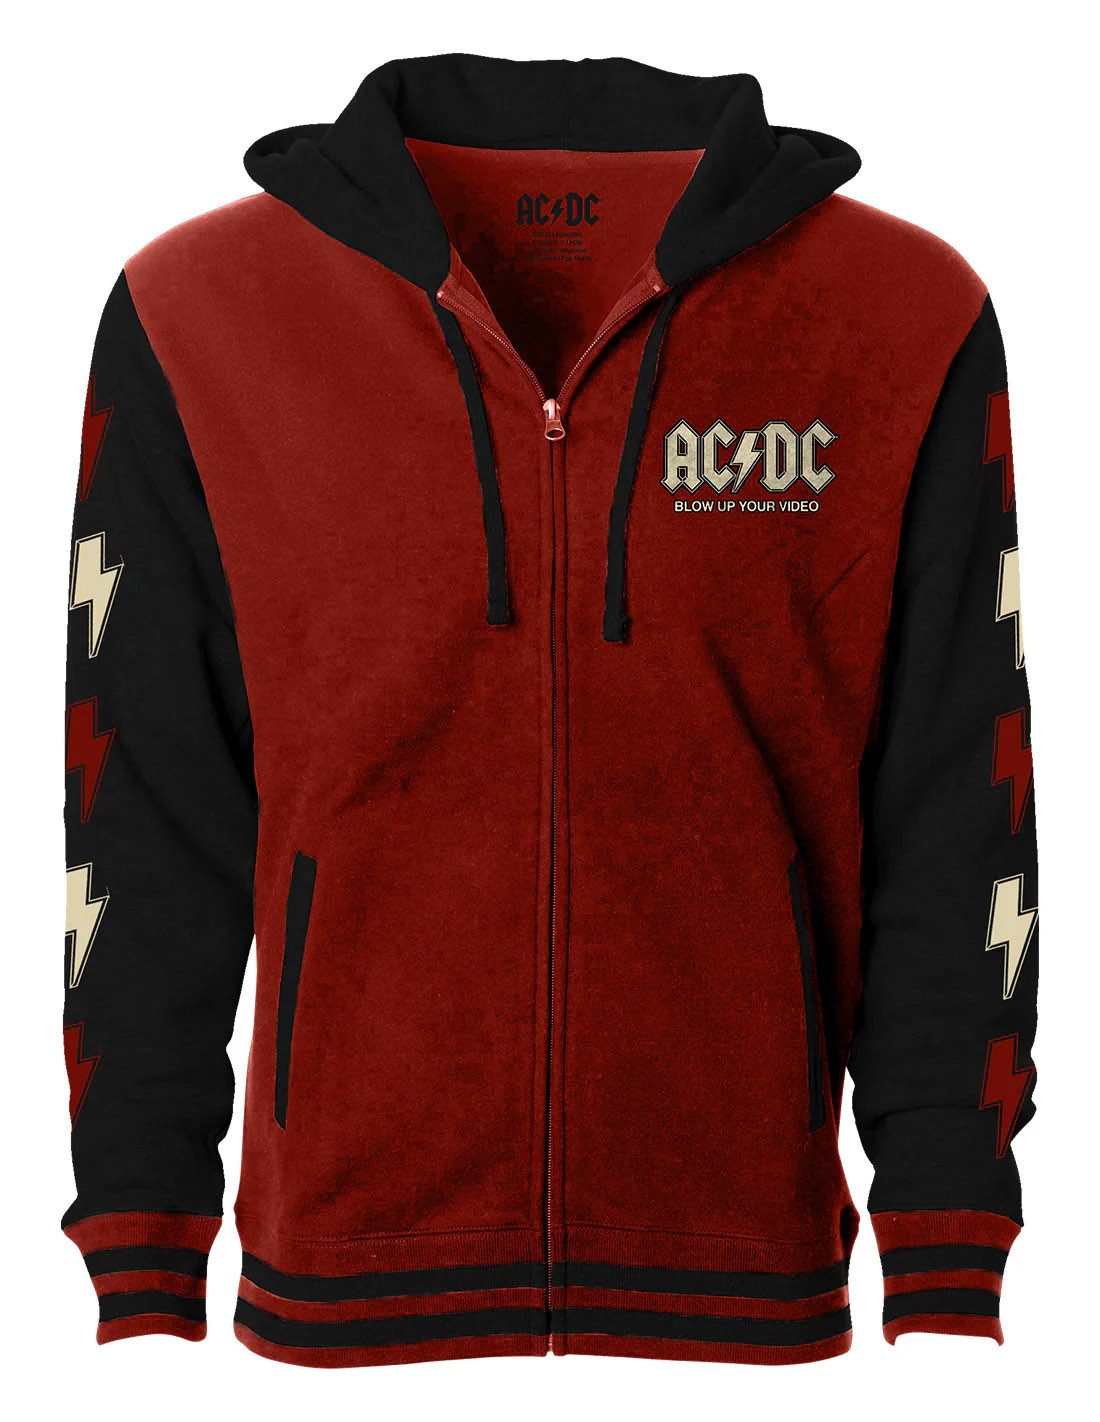 AC/DC Collegejacke Blow Up Your Video Hoodie Angus Young Blitze Kapuzenjacke